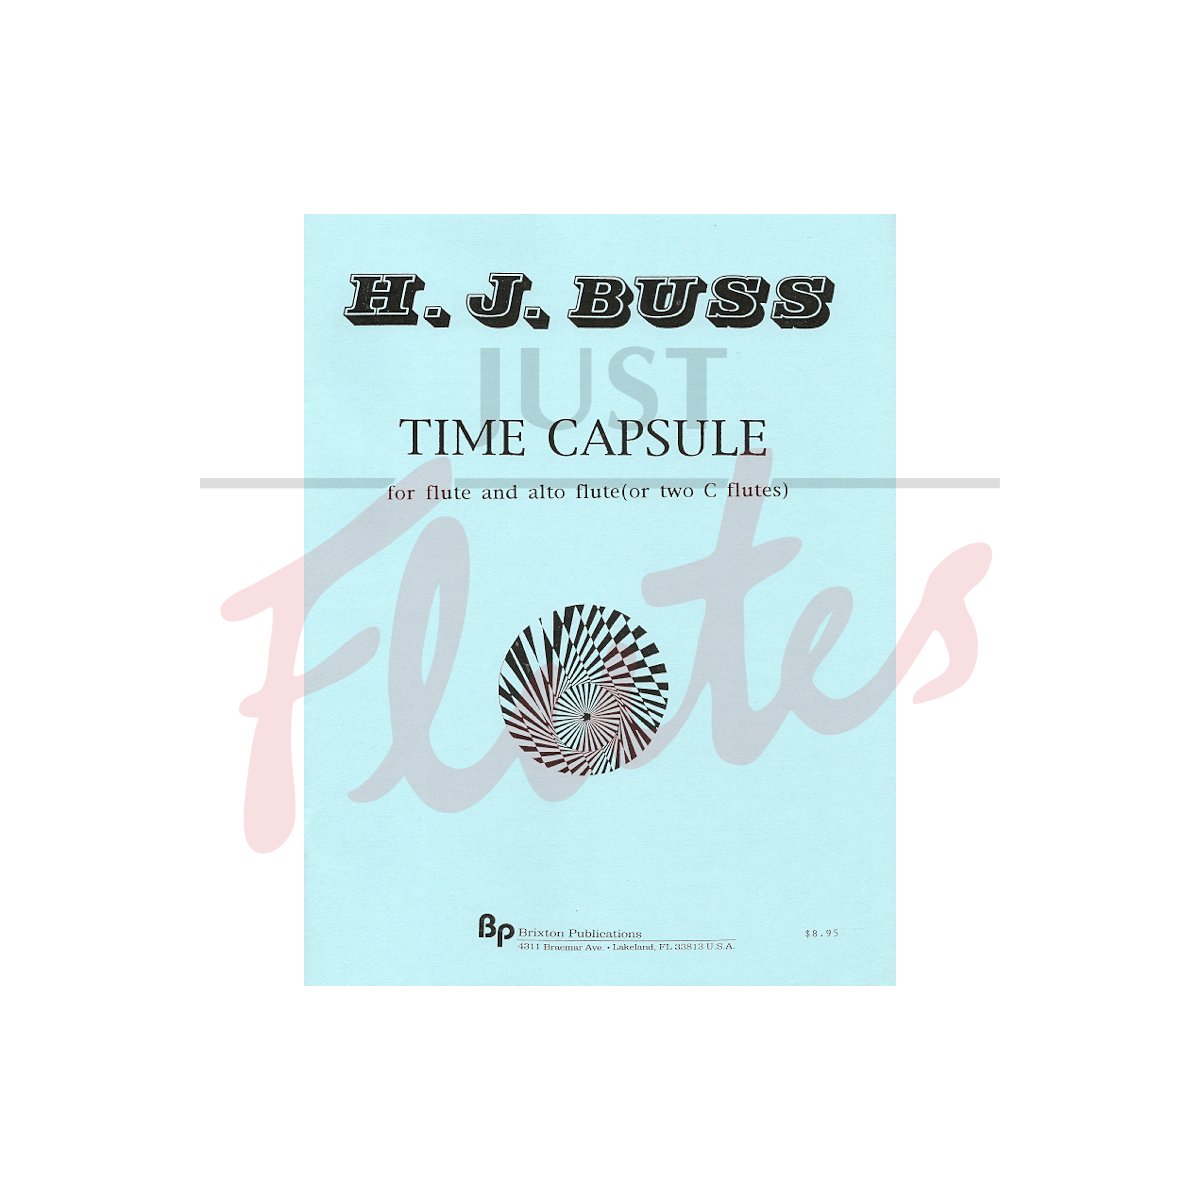 Time Capsule for Flute and Alto Flute